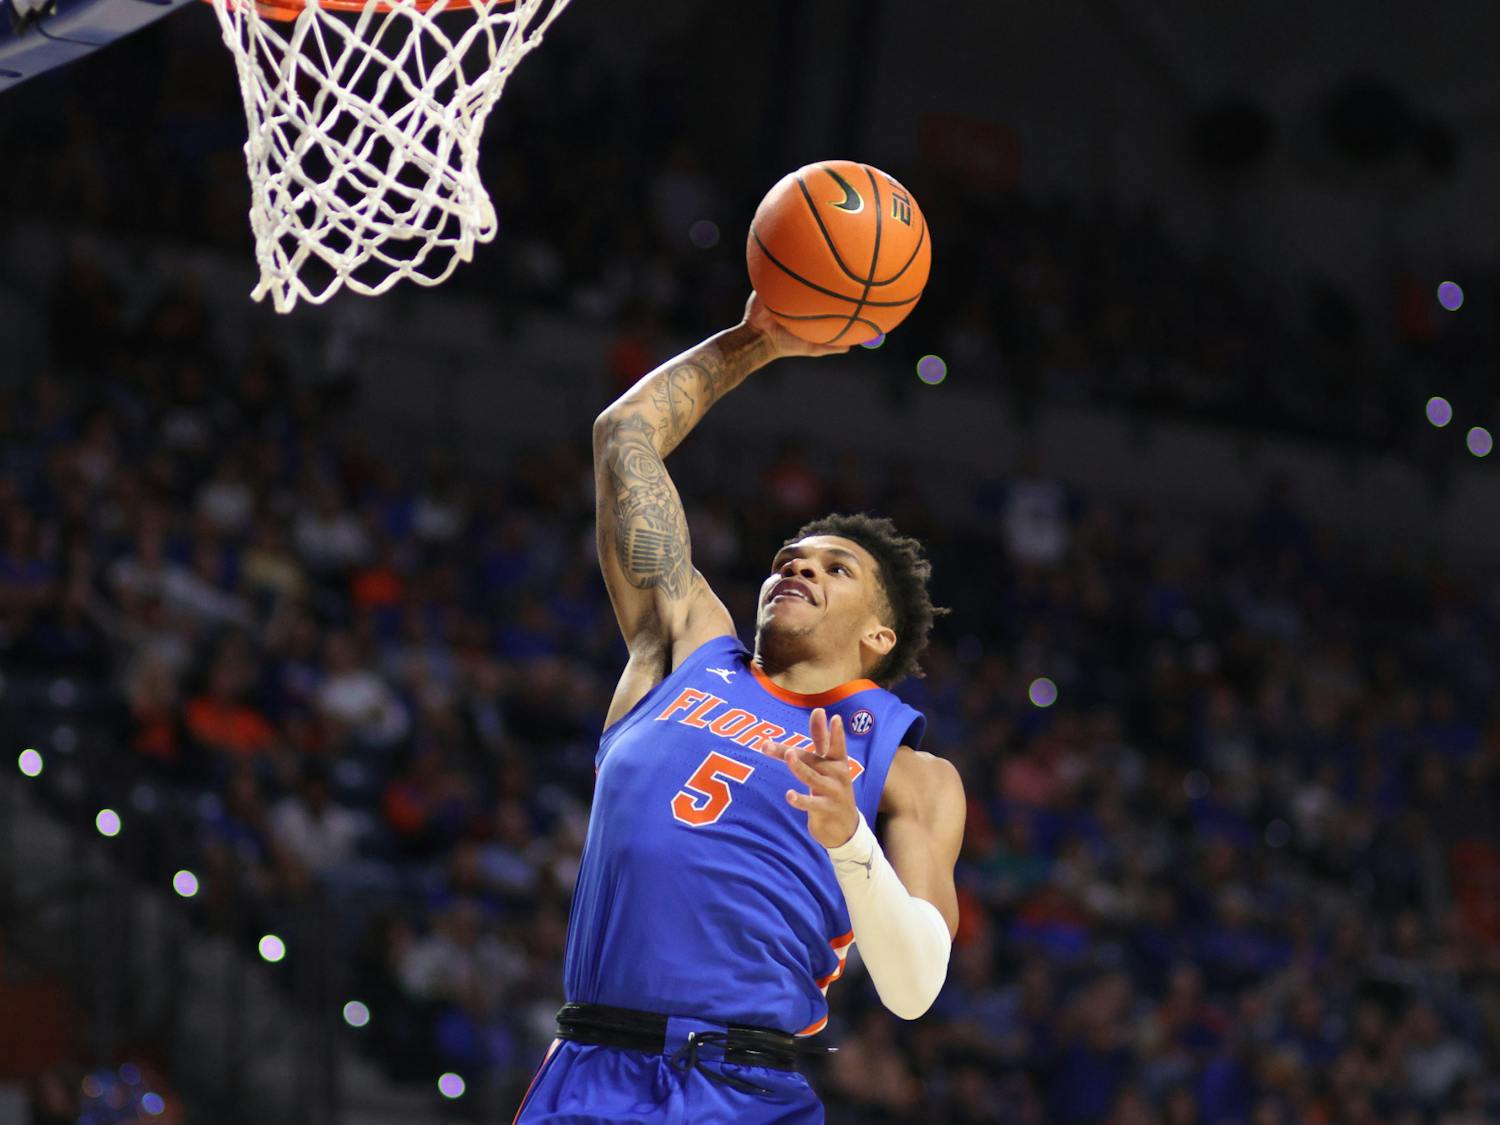 Junior guard Will Richard rises up for a dunk in the Gators' 89-68 win against the Florida State Seminoles on Friday, Nov. 17, 2023.